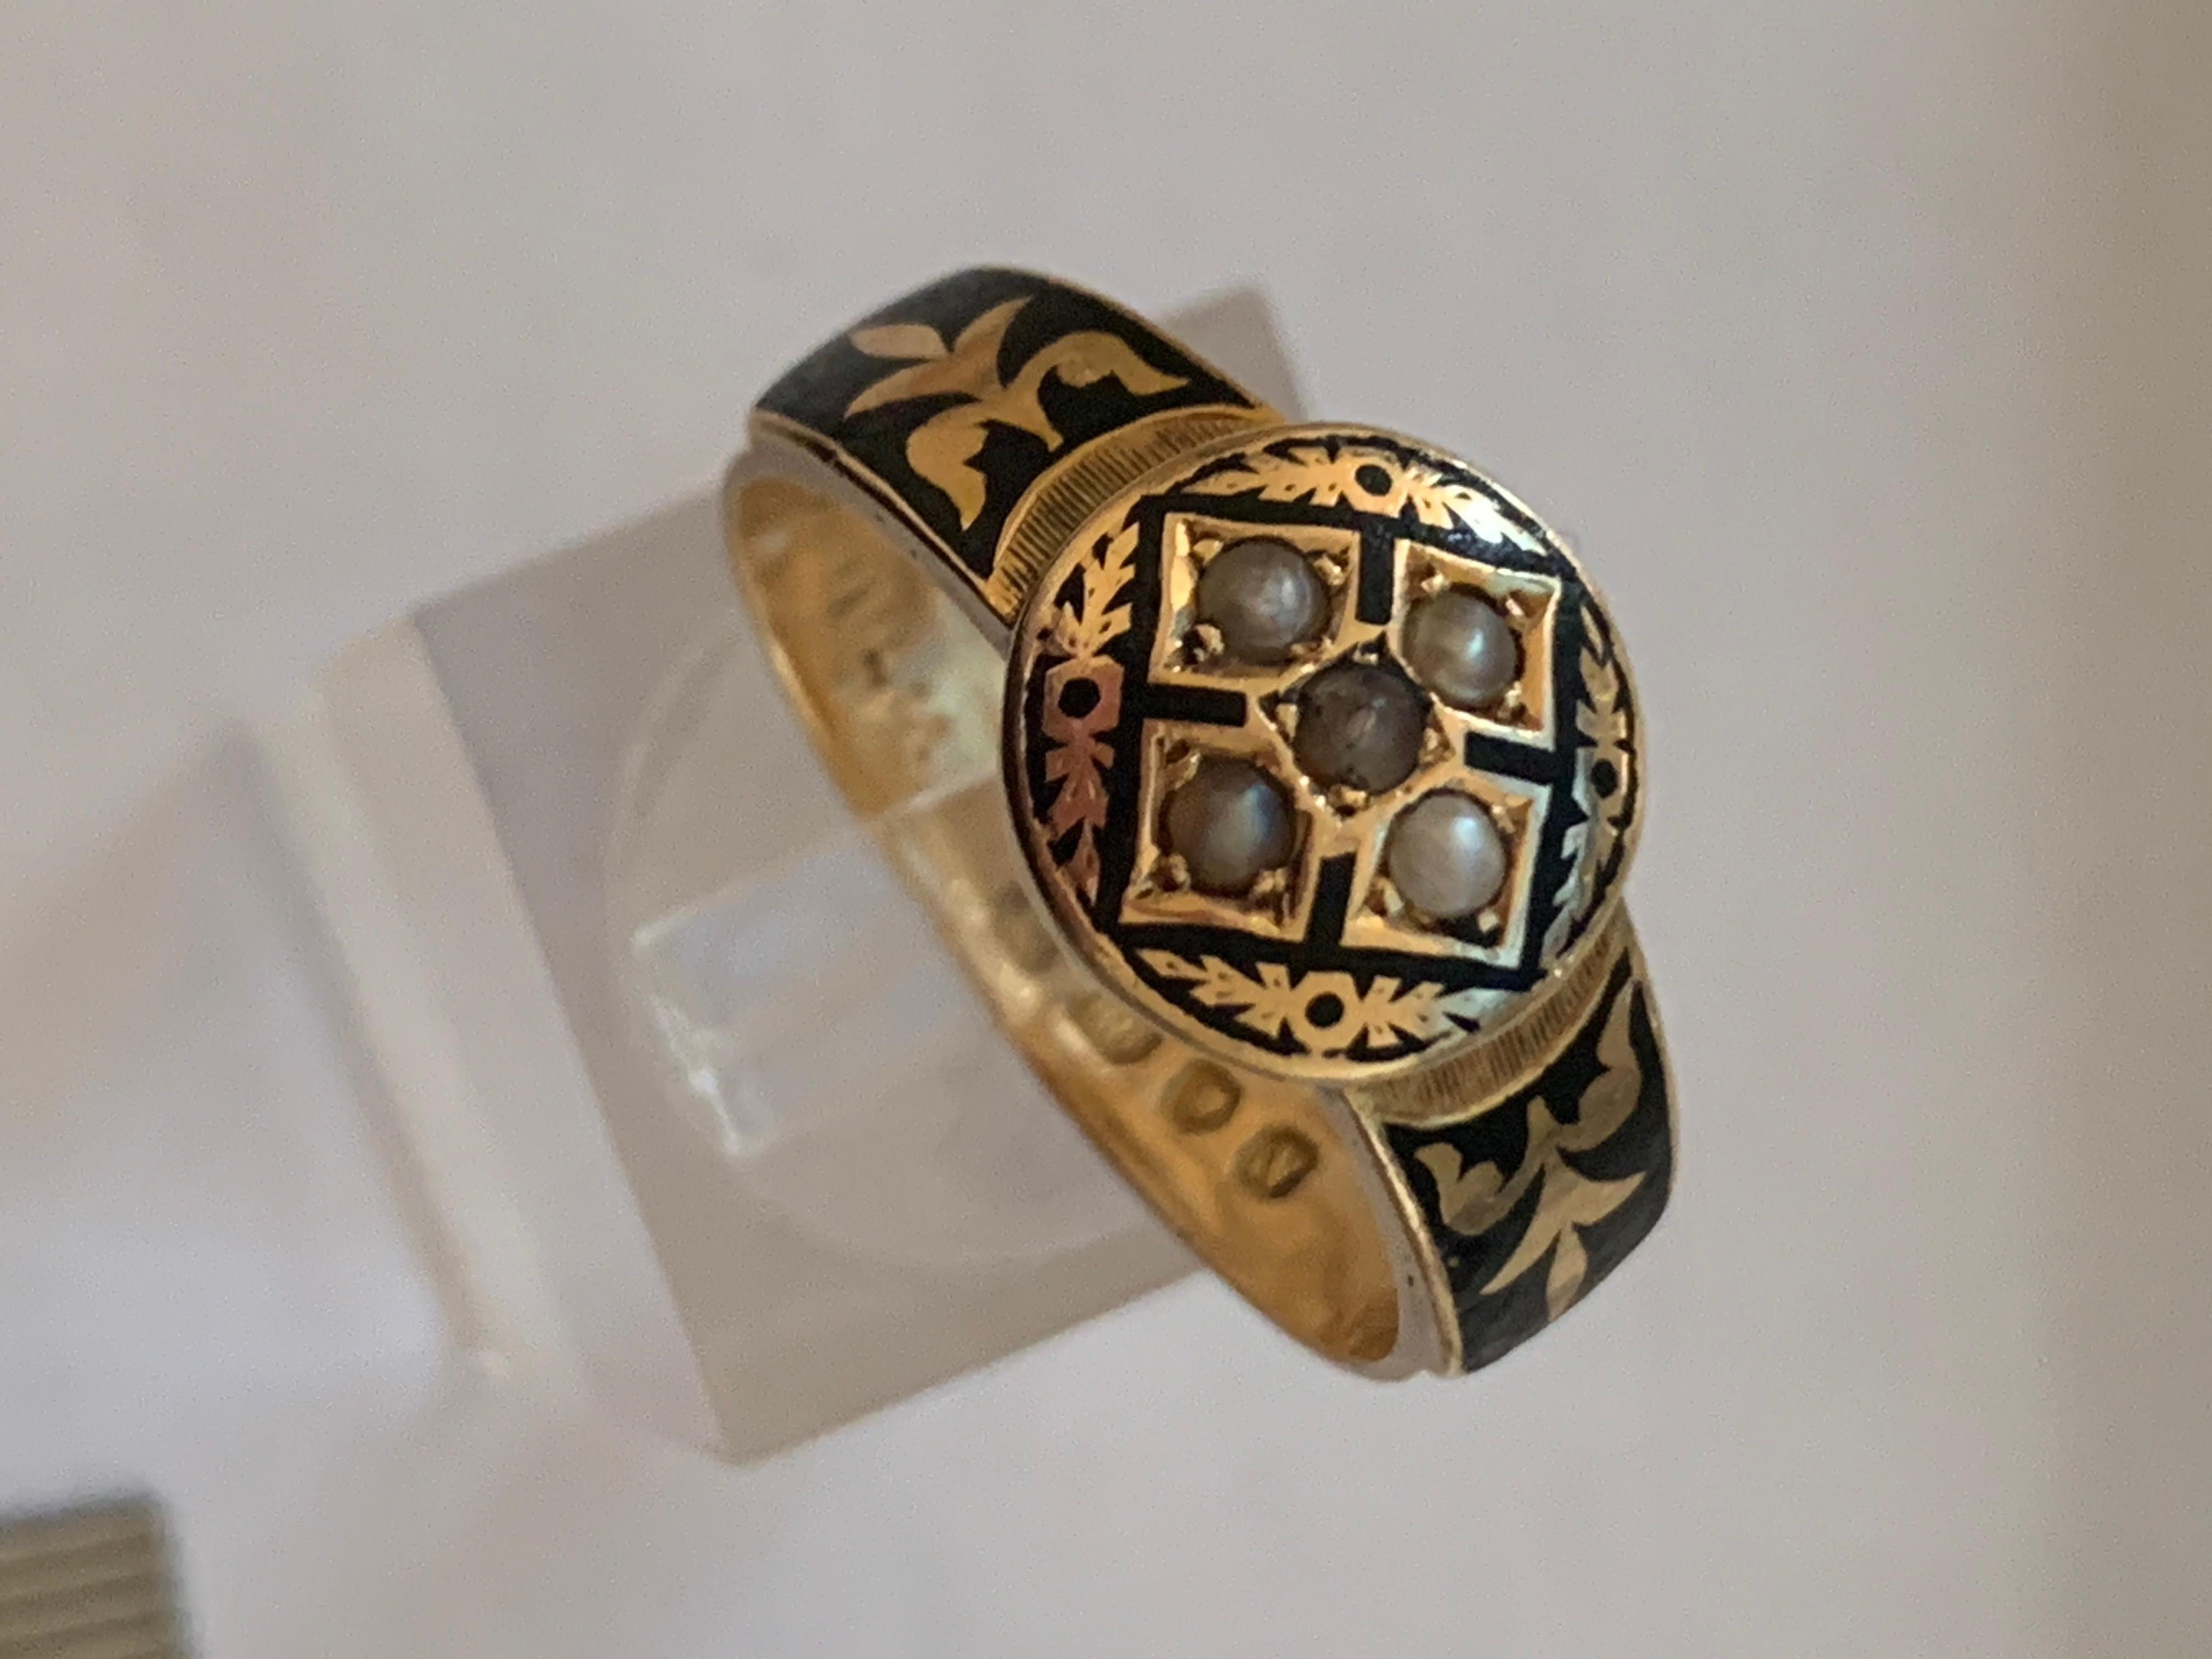 Beautiful Victorian Antique  
18ct Gold Memorial Ring 
set with fresh water pearls to the front.
& with black enamel that wears away on the back of the band .

The pearl in the centre has some surface damage - visible under an eye loop

inside the